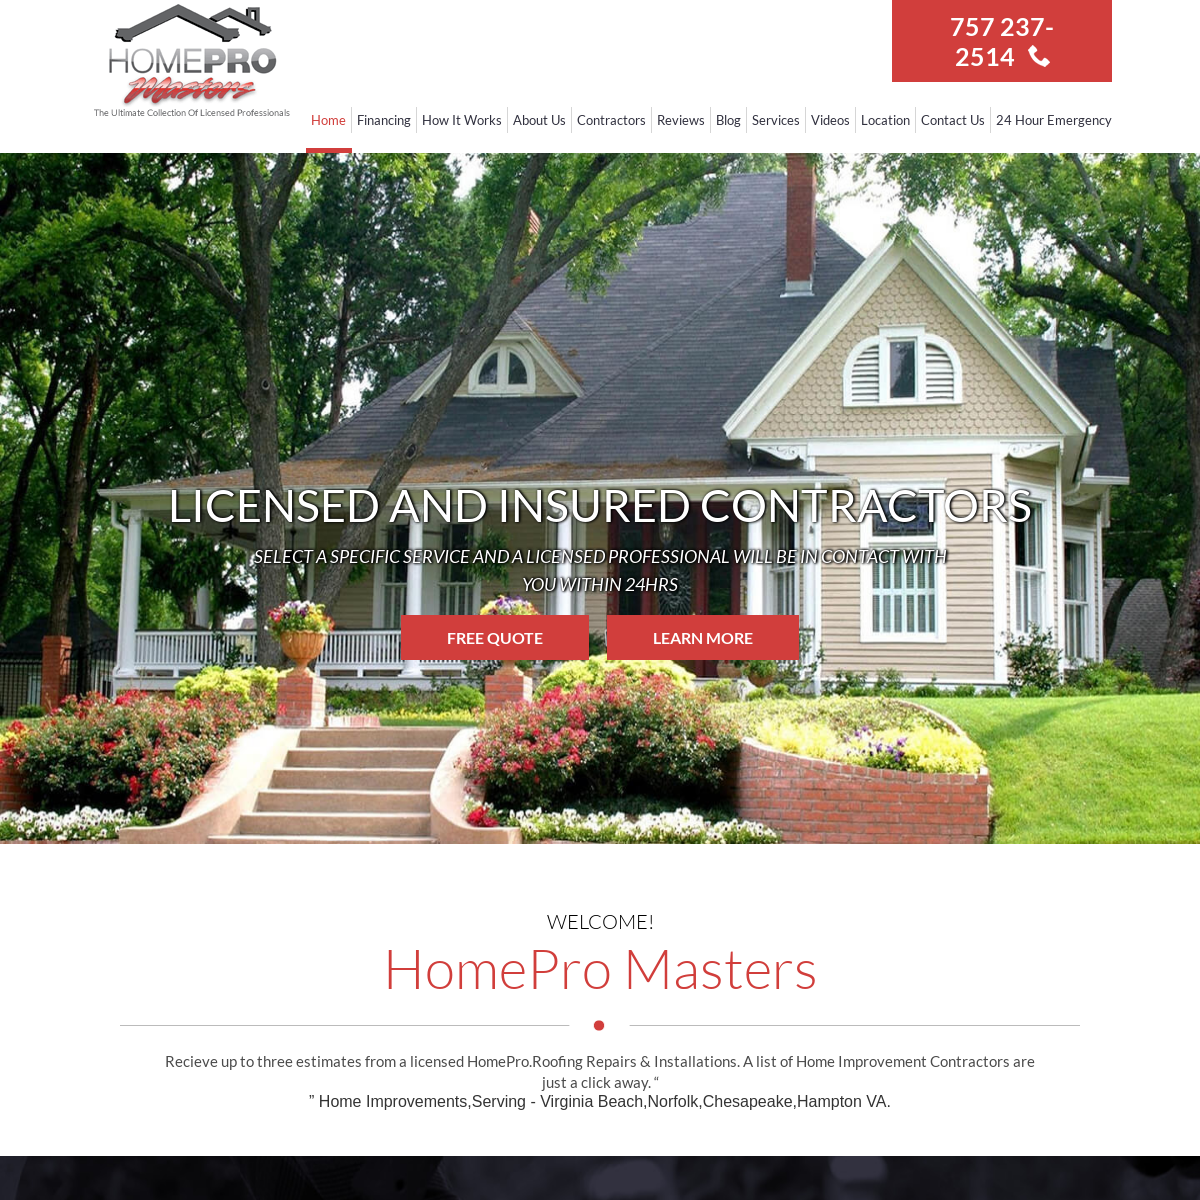 A complete backup of homepromasters.com